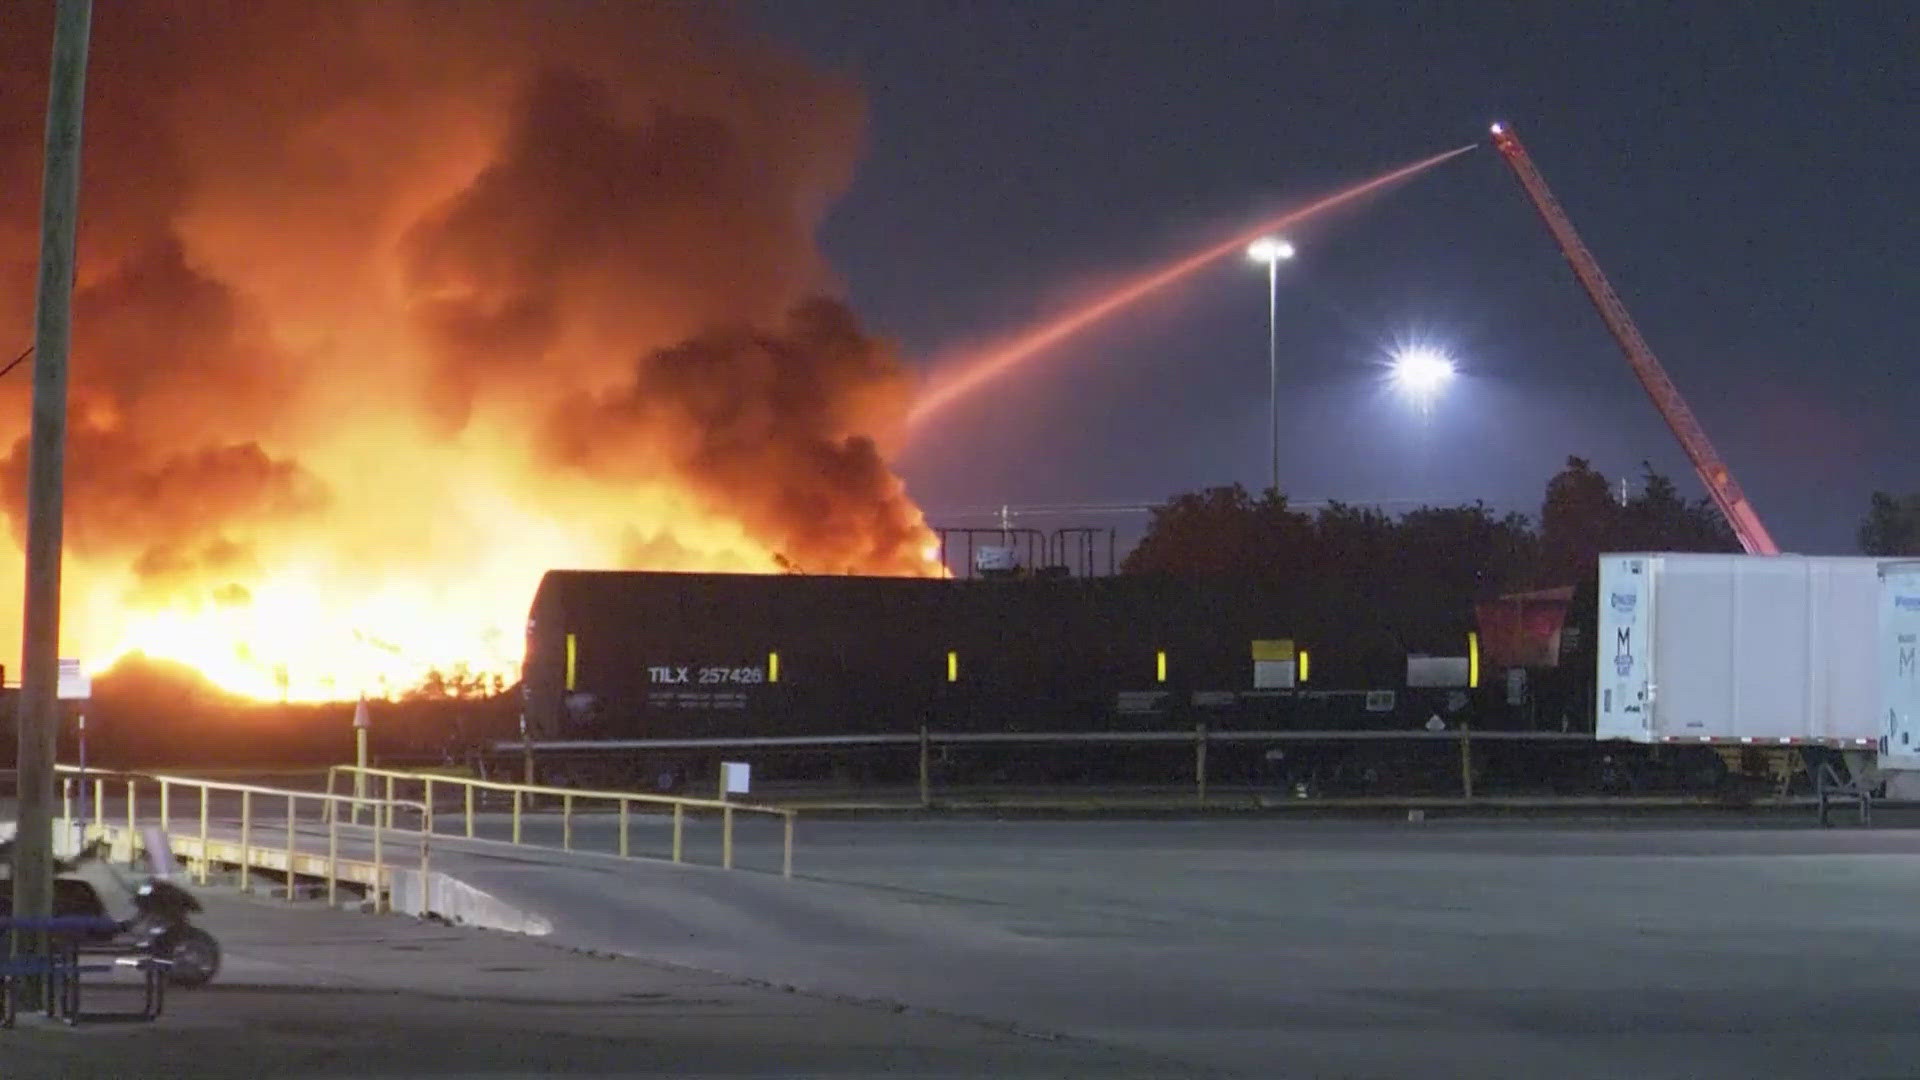 A huge fire is still burning at a recycling facility in northeast Houston. The fire first broke out at the recycling facility on Wallisville Road around 11 p.m.